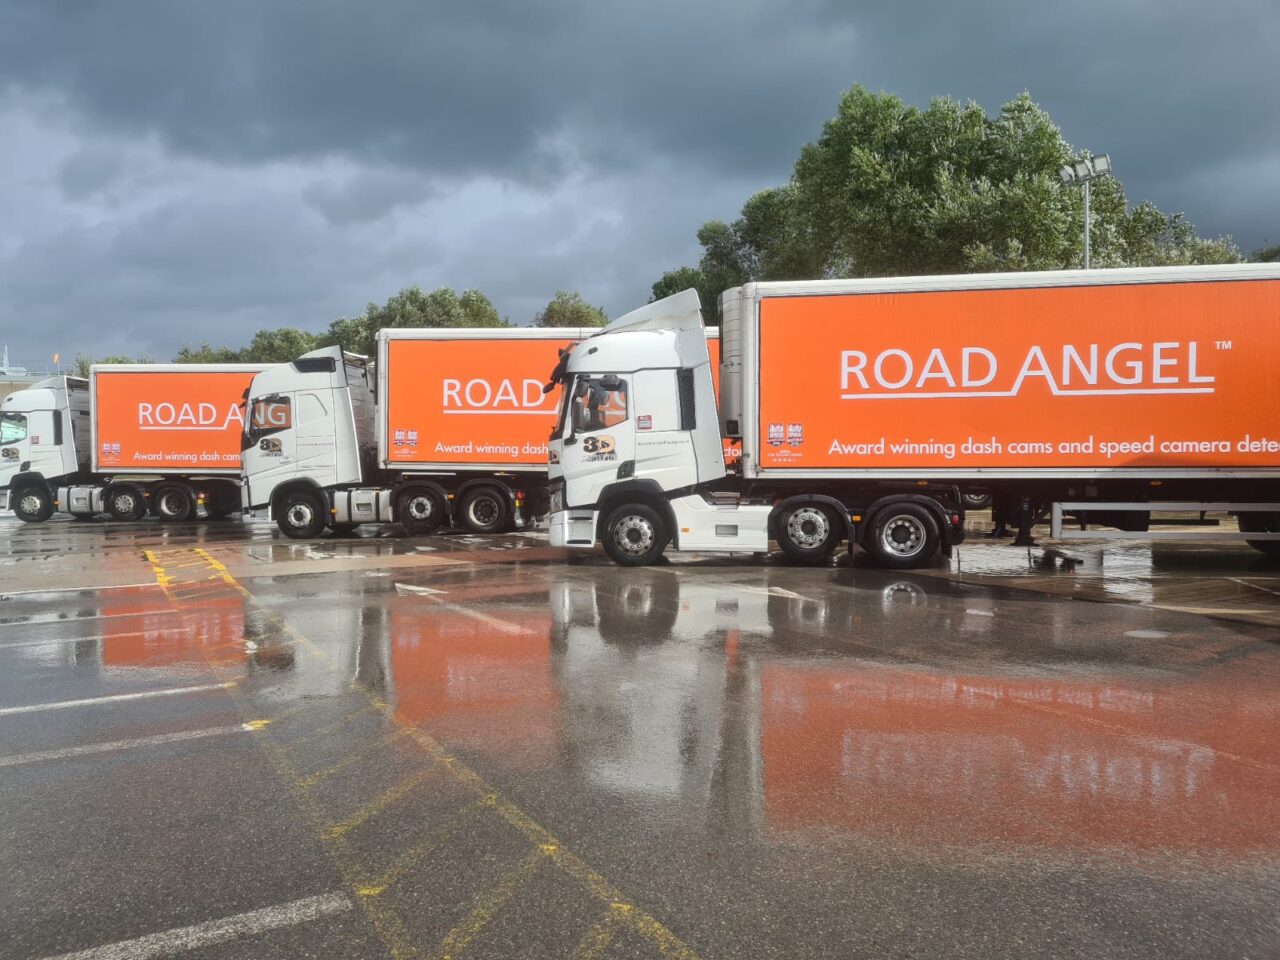 Road Angels Truck Advertising Campaign Ready To Roll